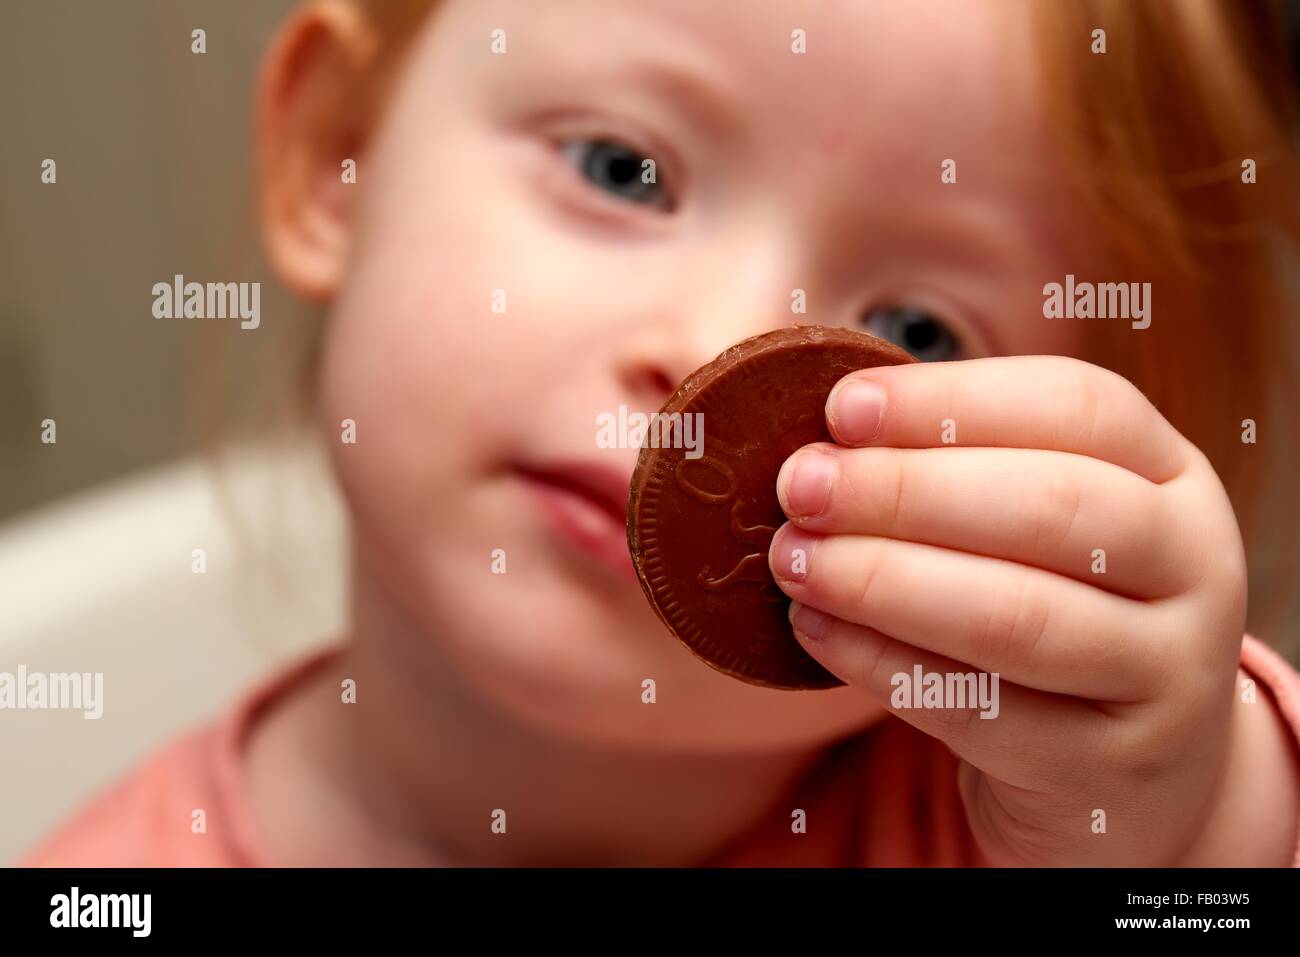 A three year old girl holding a chocolate coin Stock Photo